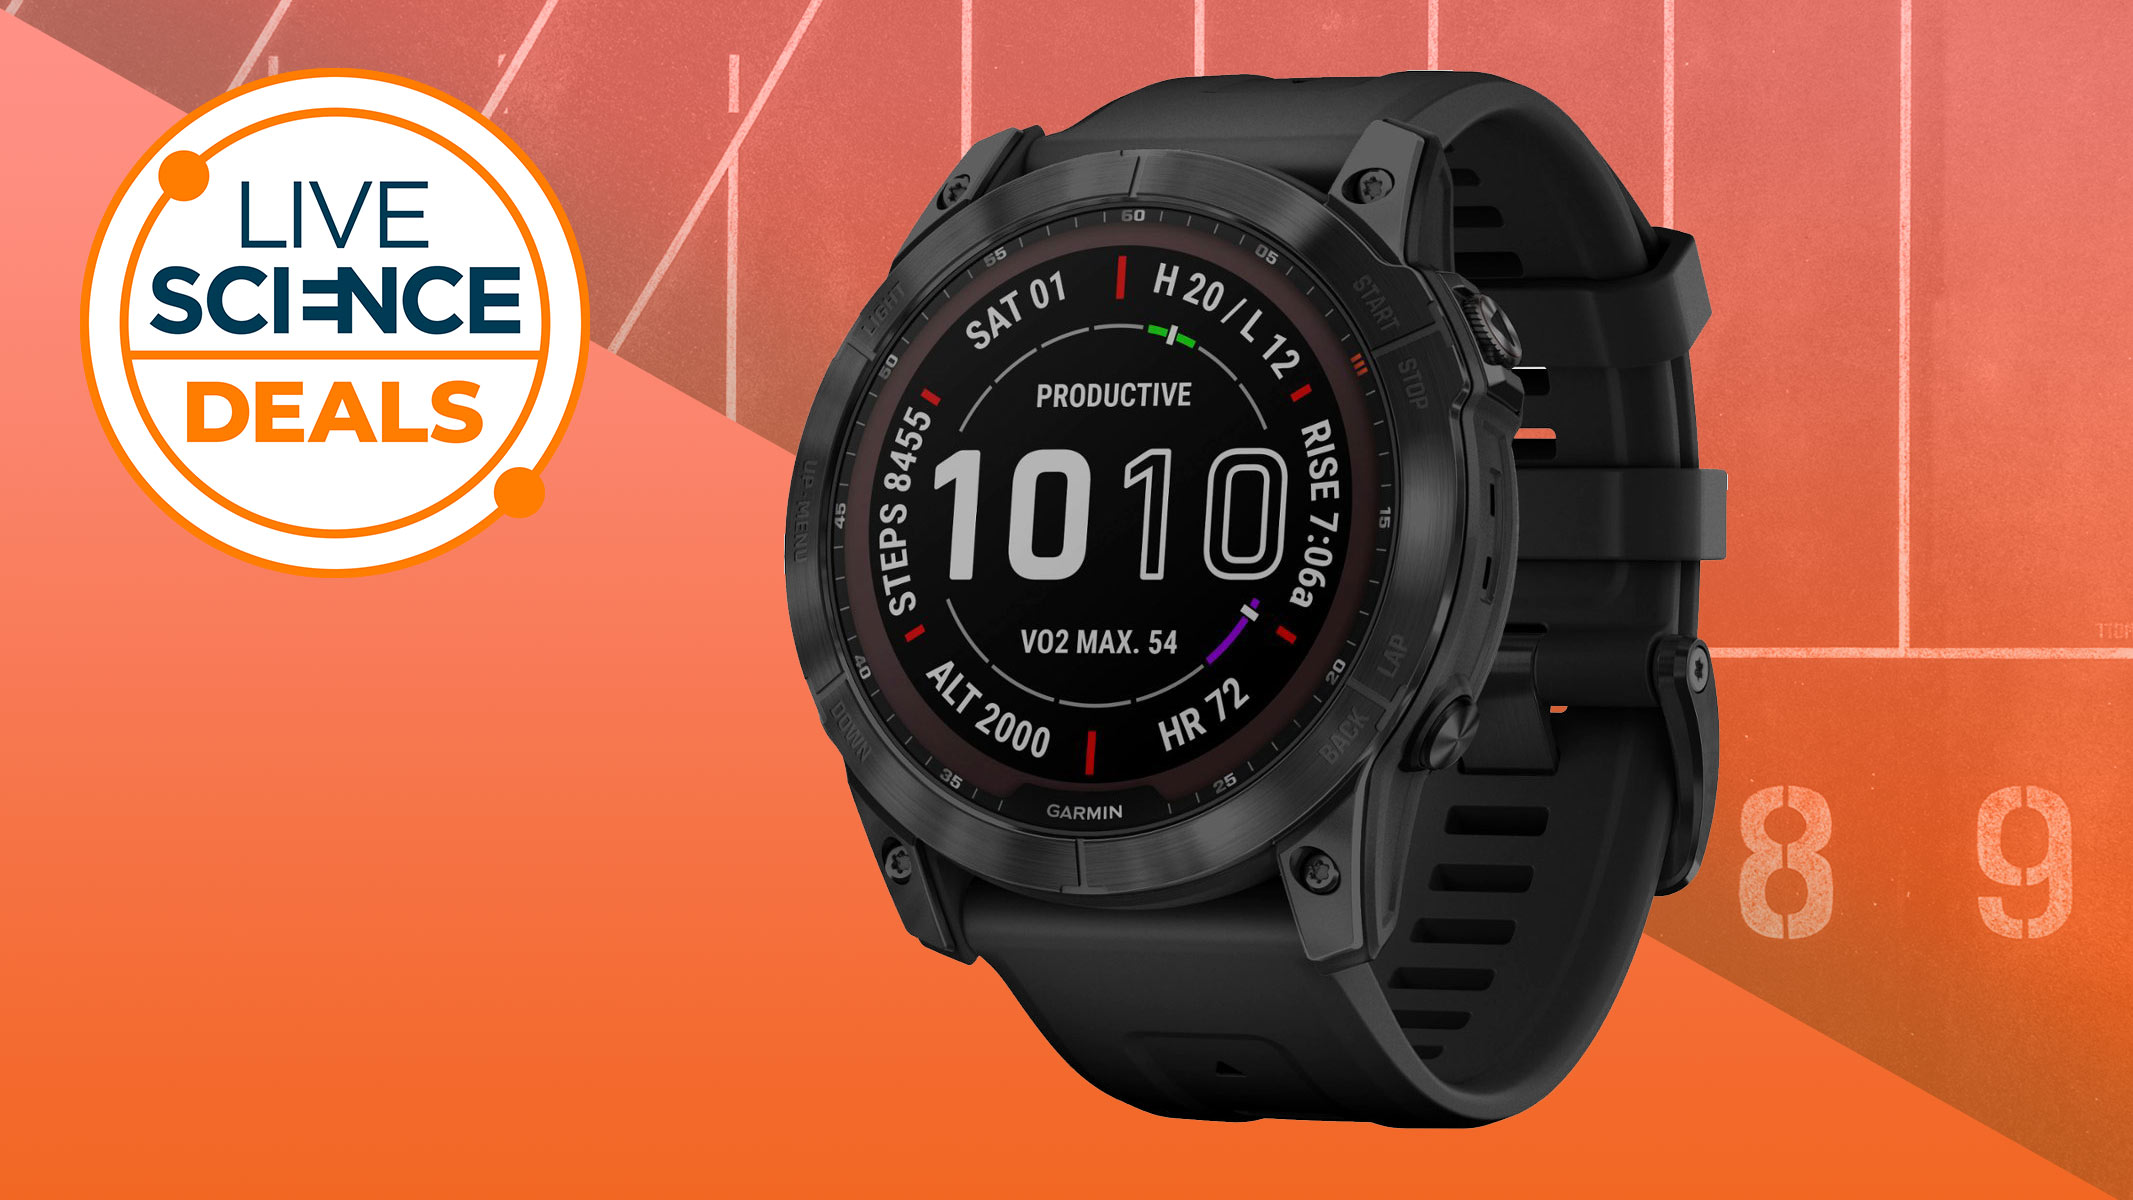  Save a whopping $250 on one of the best Garmin watches with this anti-Prime Day deal 